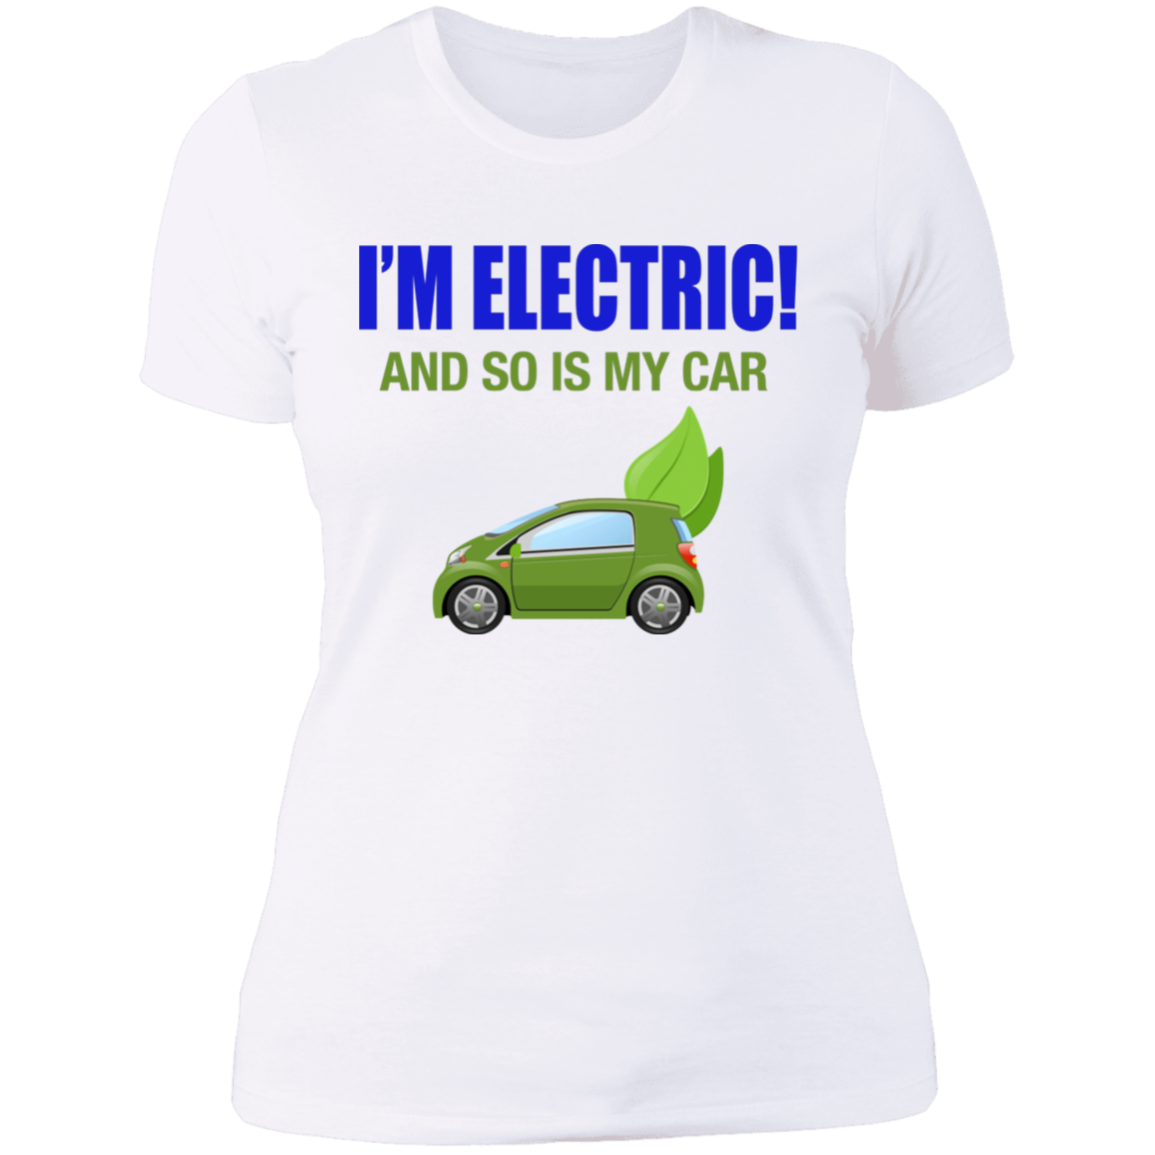 I'm Electric! Eco Renew Collection